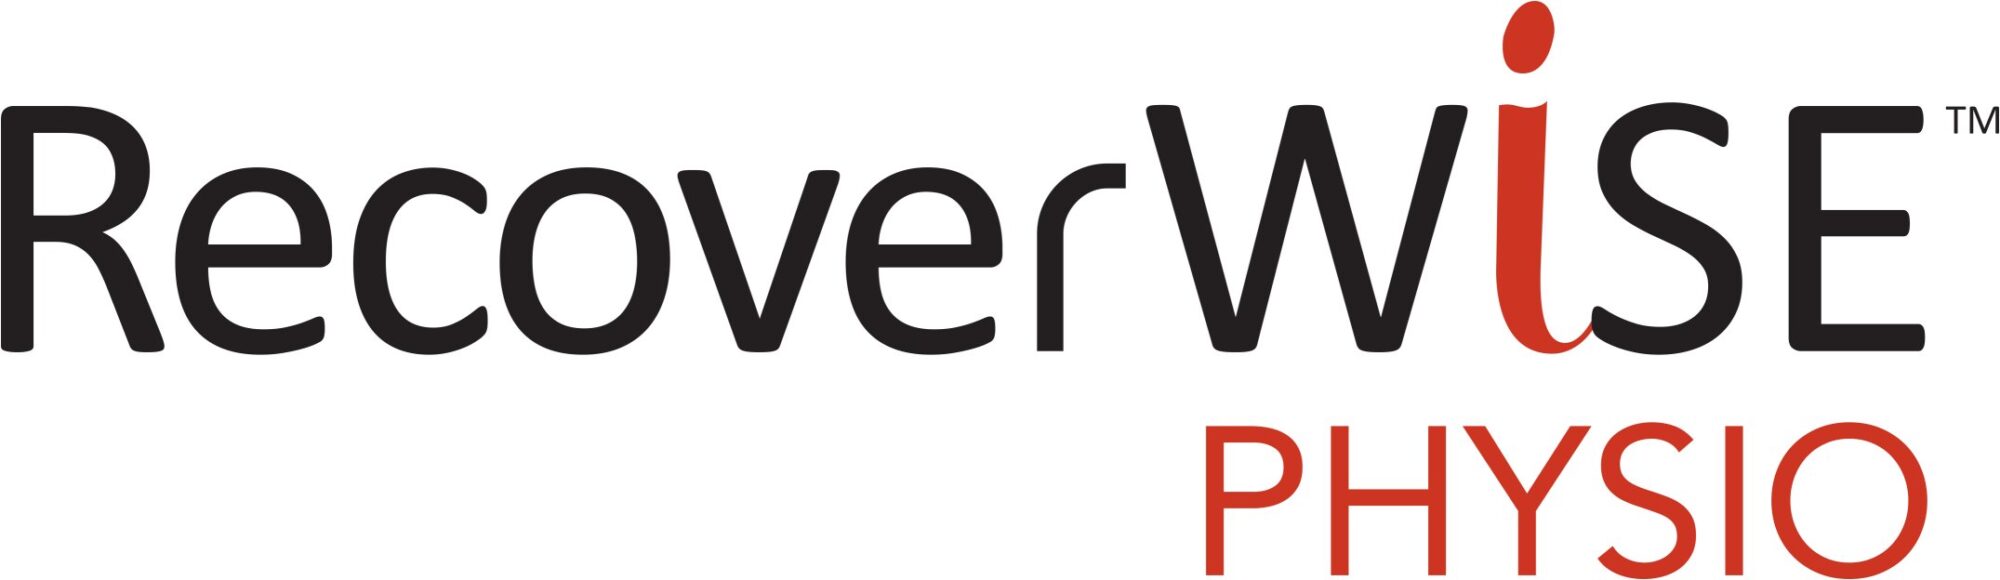 RecoverWiSE Physio Logo new2